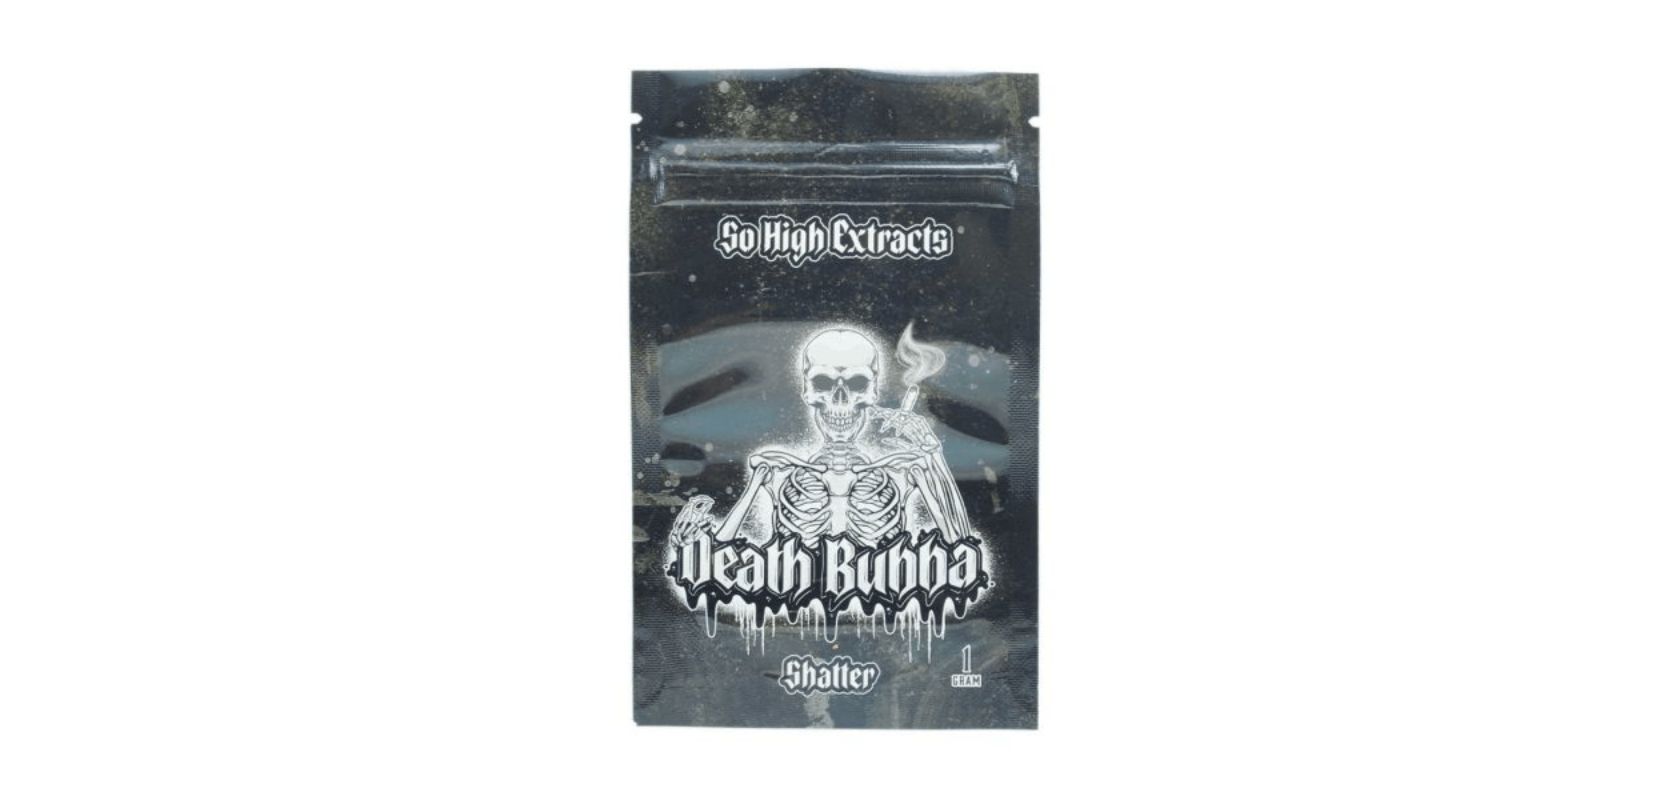 As a close relative of Bubba OG, Death Bubba has taken things up a notch in terms of potency - with an added 30% of Sativa elements. 